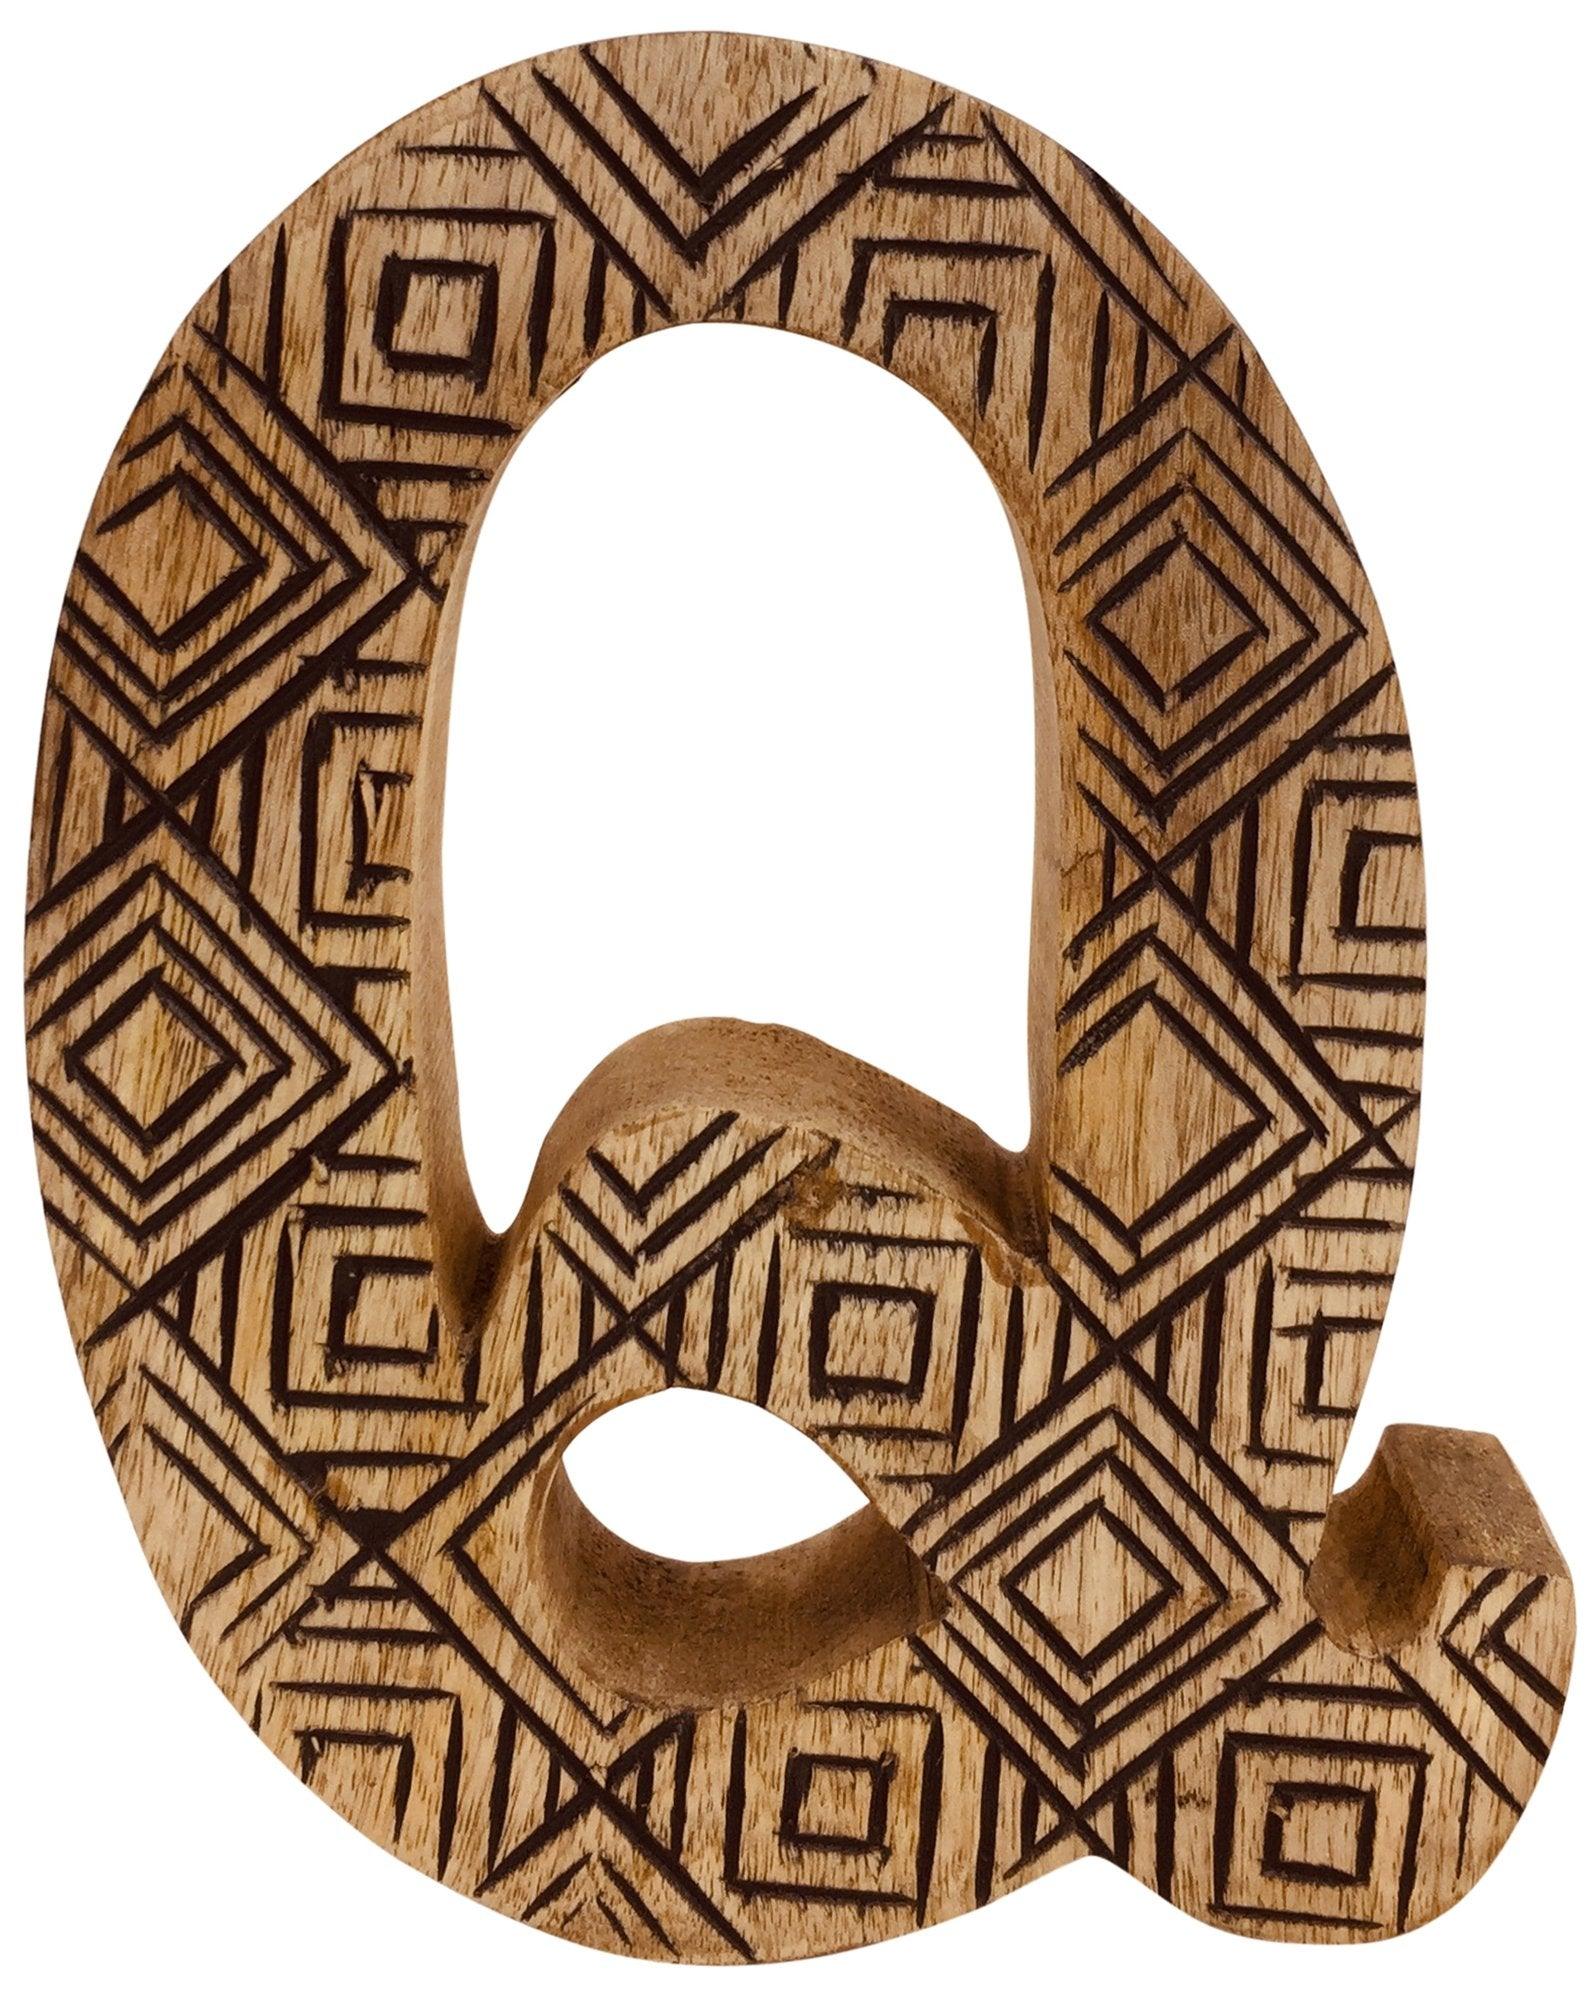 Hand Carved Wooden Geometric Letter Q-Single Letters